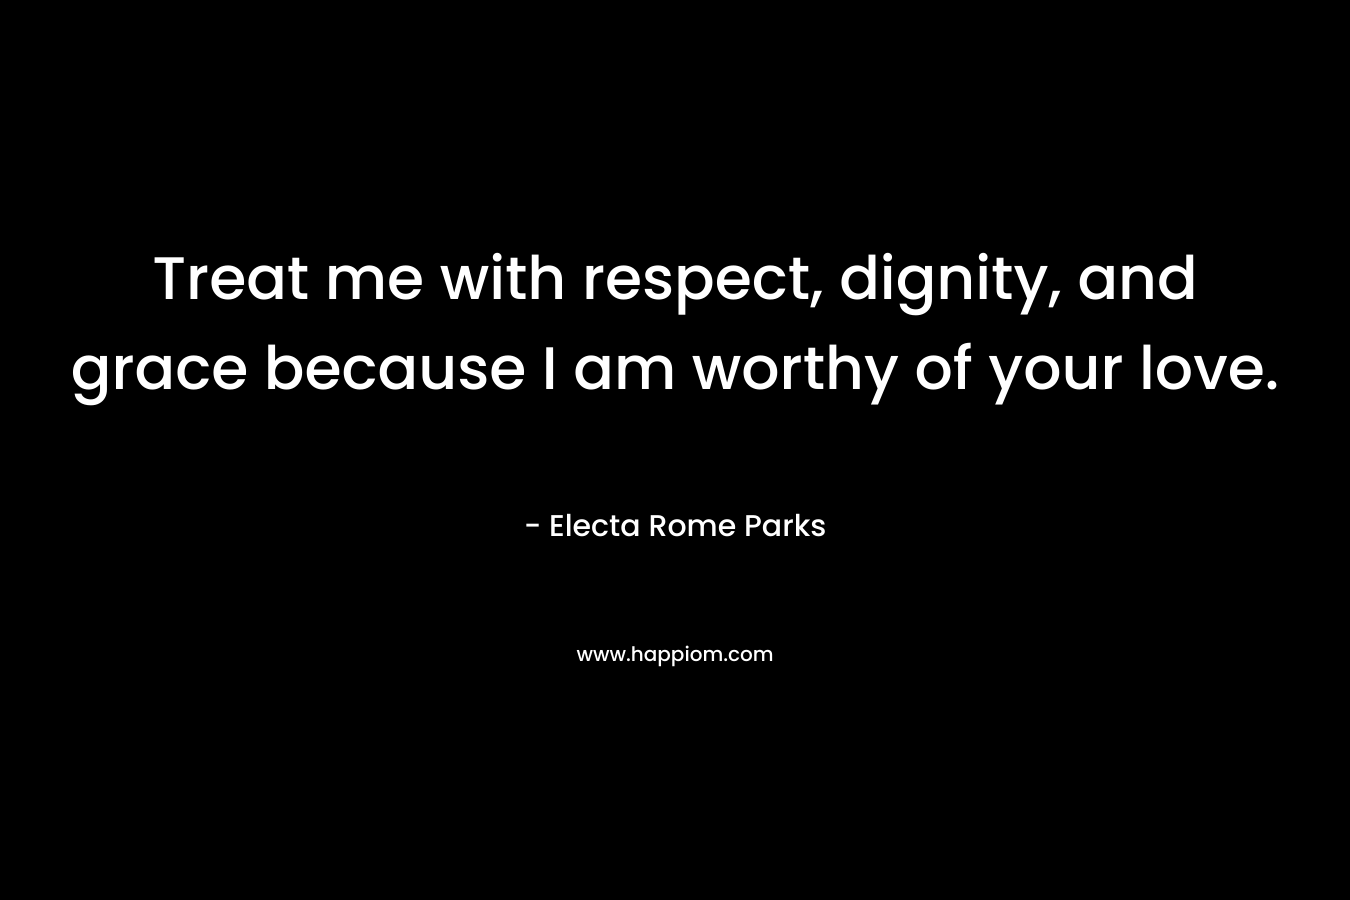 Treat me with respect, dignity, and grace because I am worthy of your love.